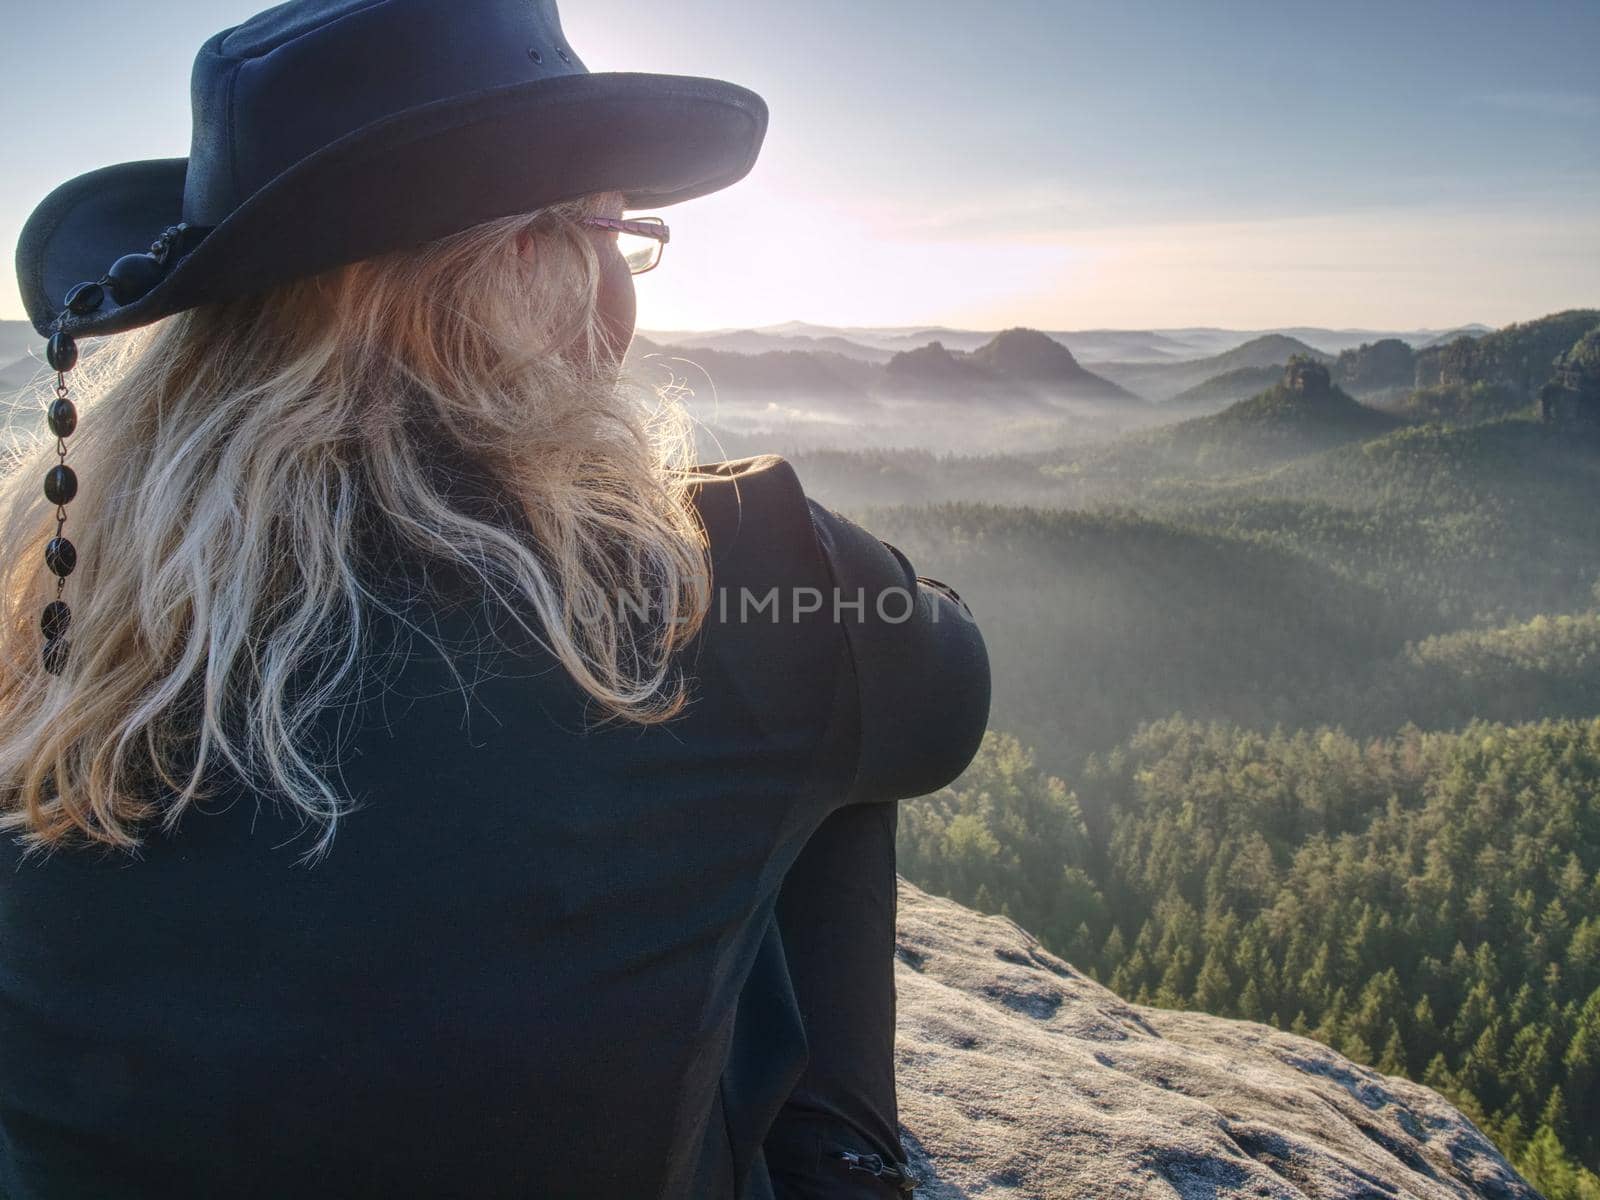 Woman hiker with leather hat conquer highest peak. Woman hiker traveling alone in nature. Mountain landscape. . Hipster hiker style.